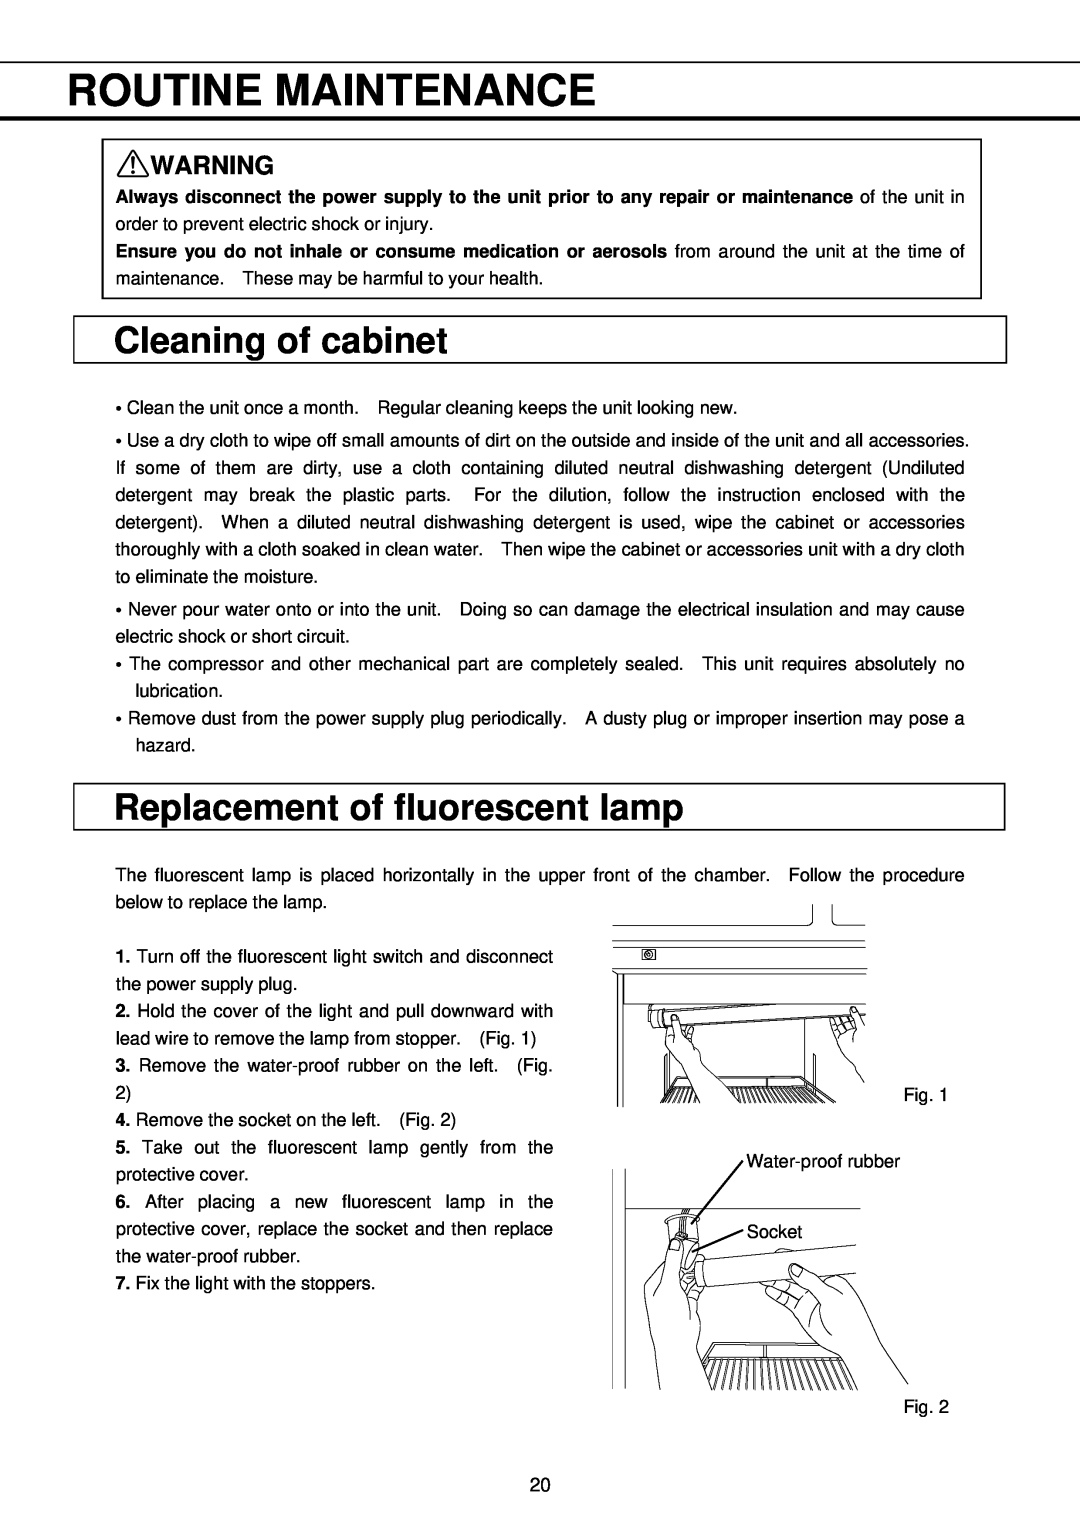 Sanyo MBR-304DR instruction manual Routine Maintenance, Cleaning of cabinet, Replacement of fluorescent lamp 